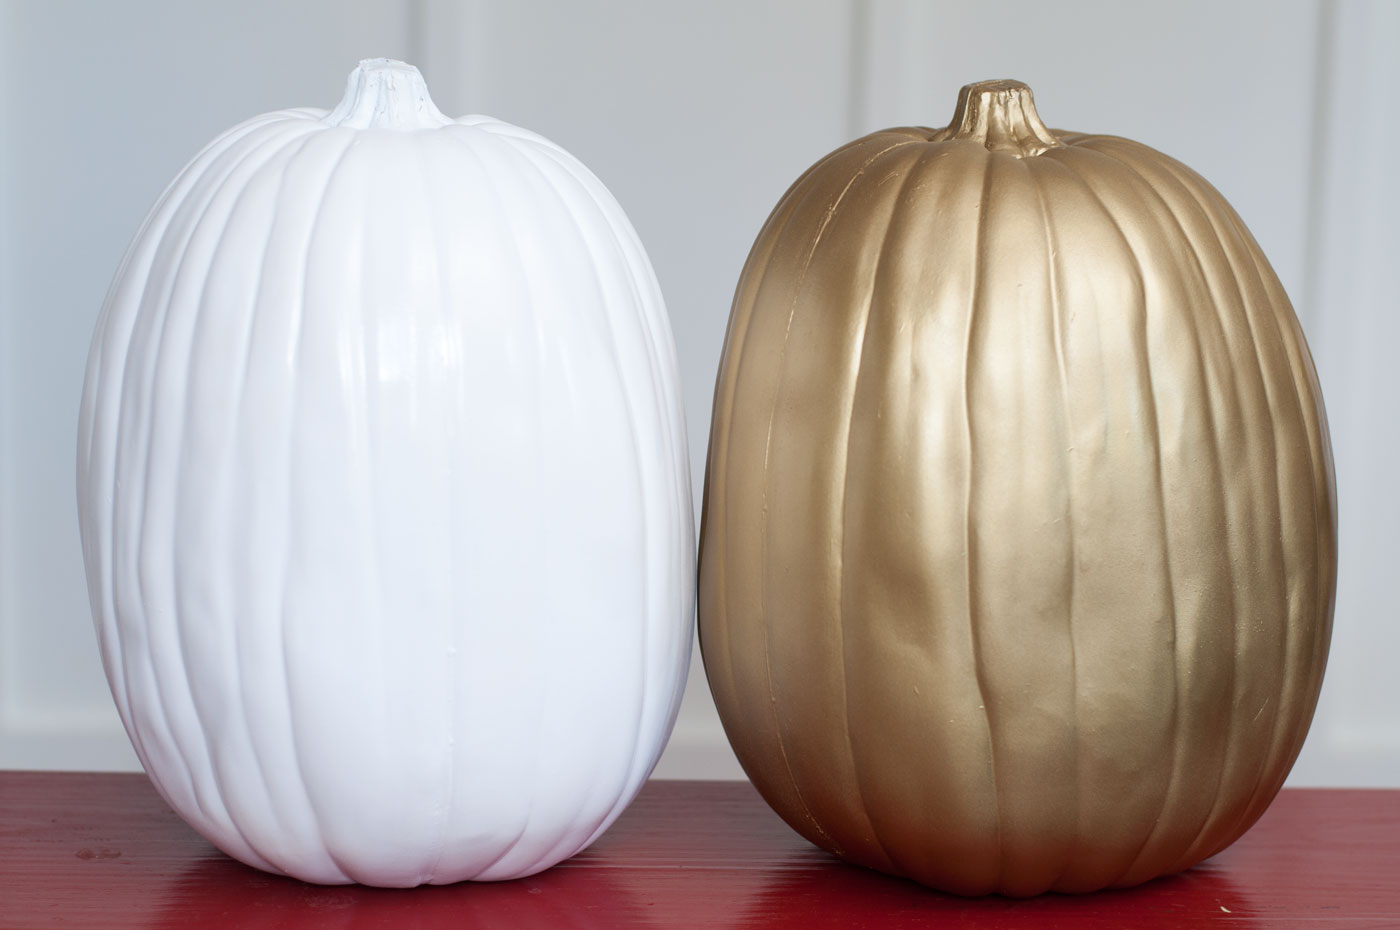 Faux pumpkins spray painted white and gold